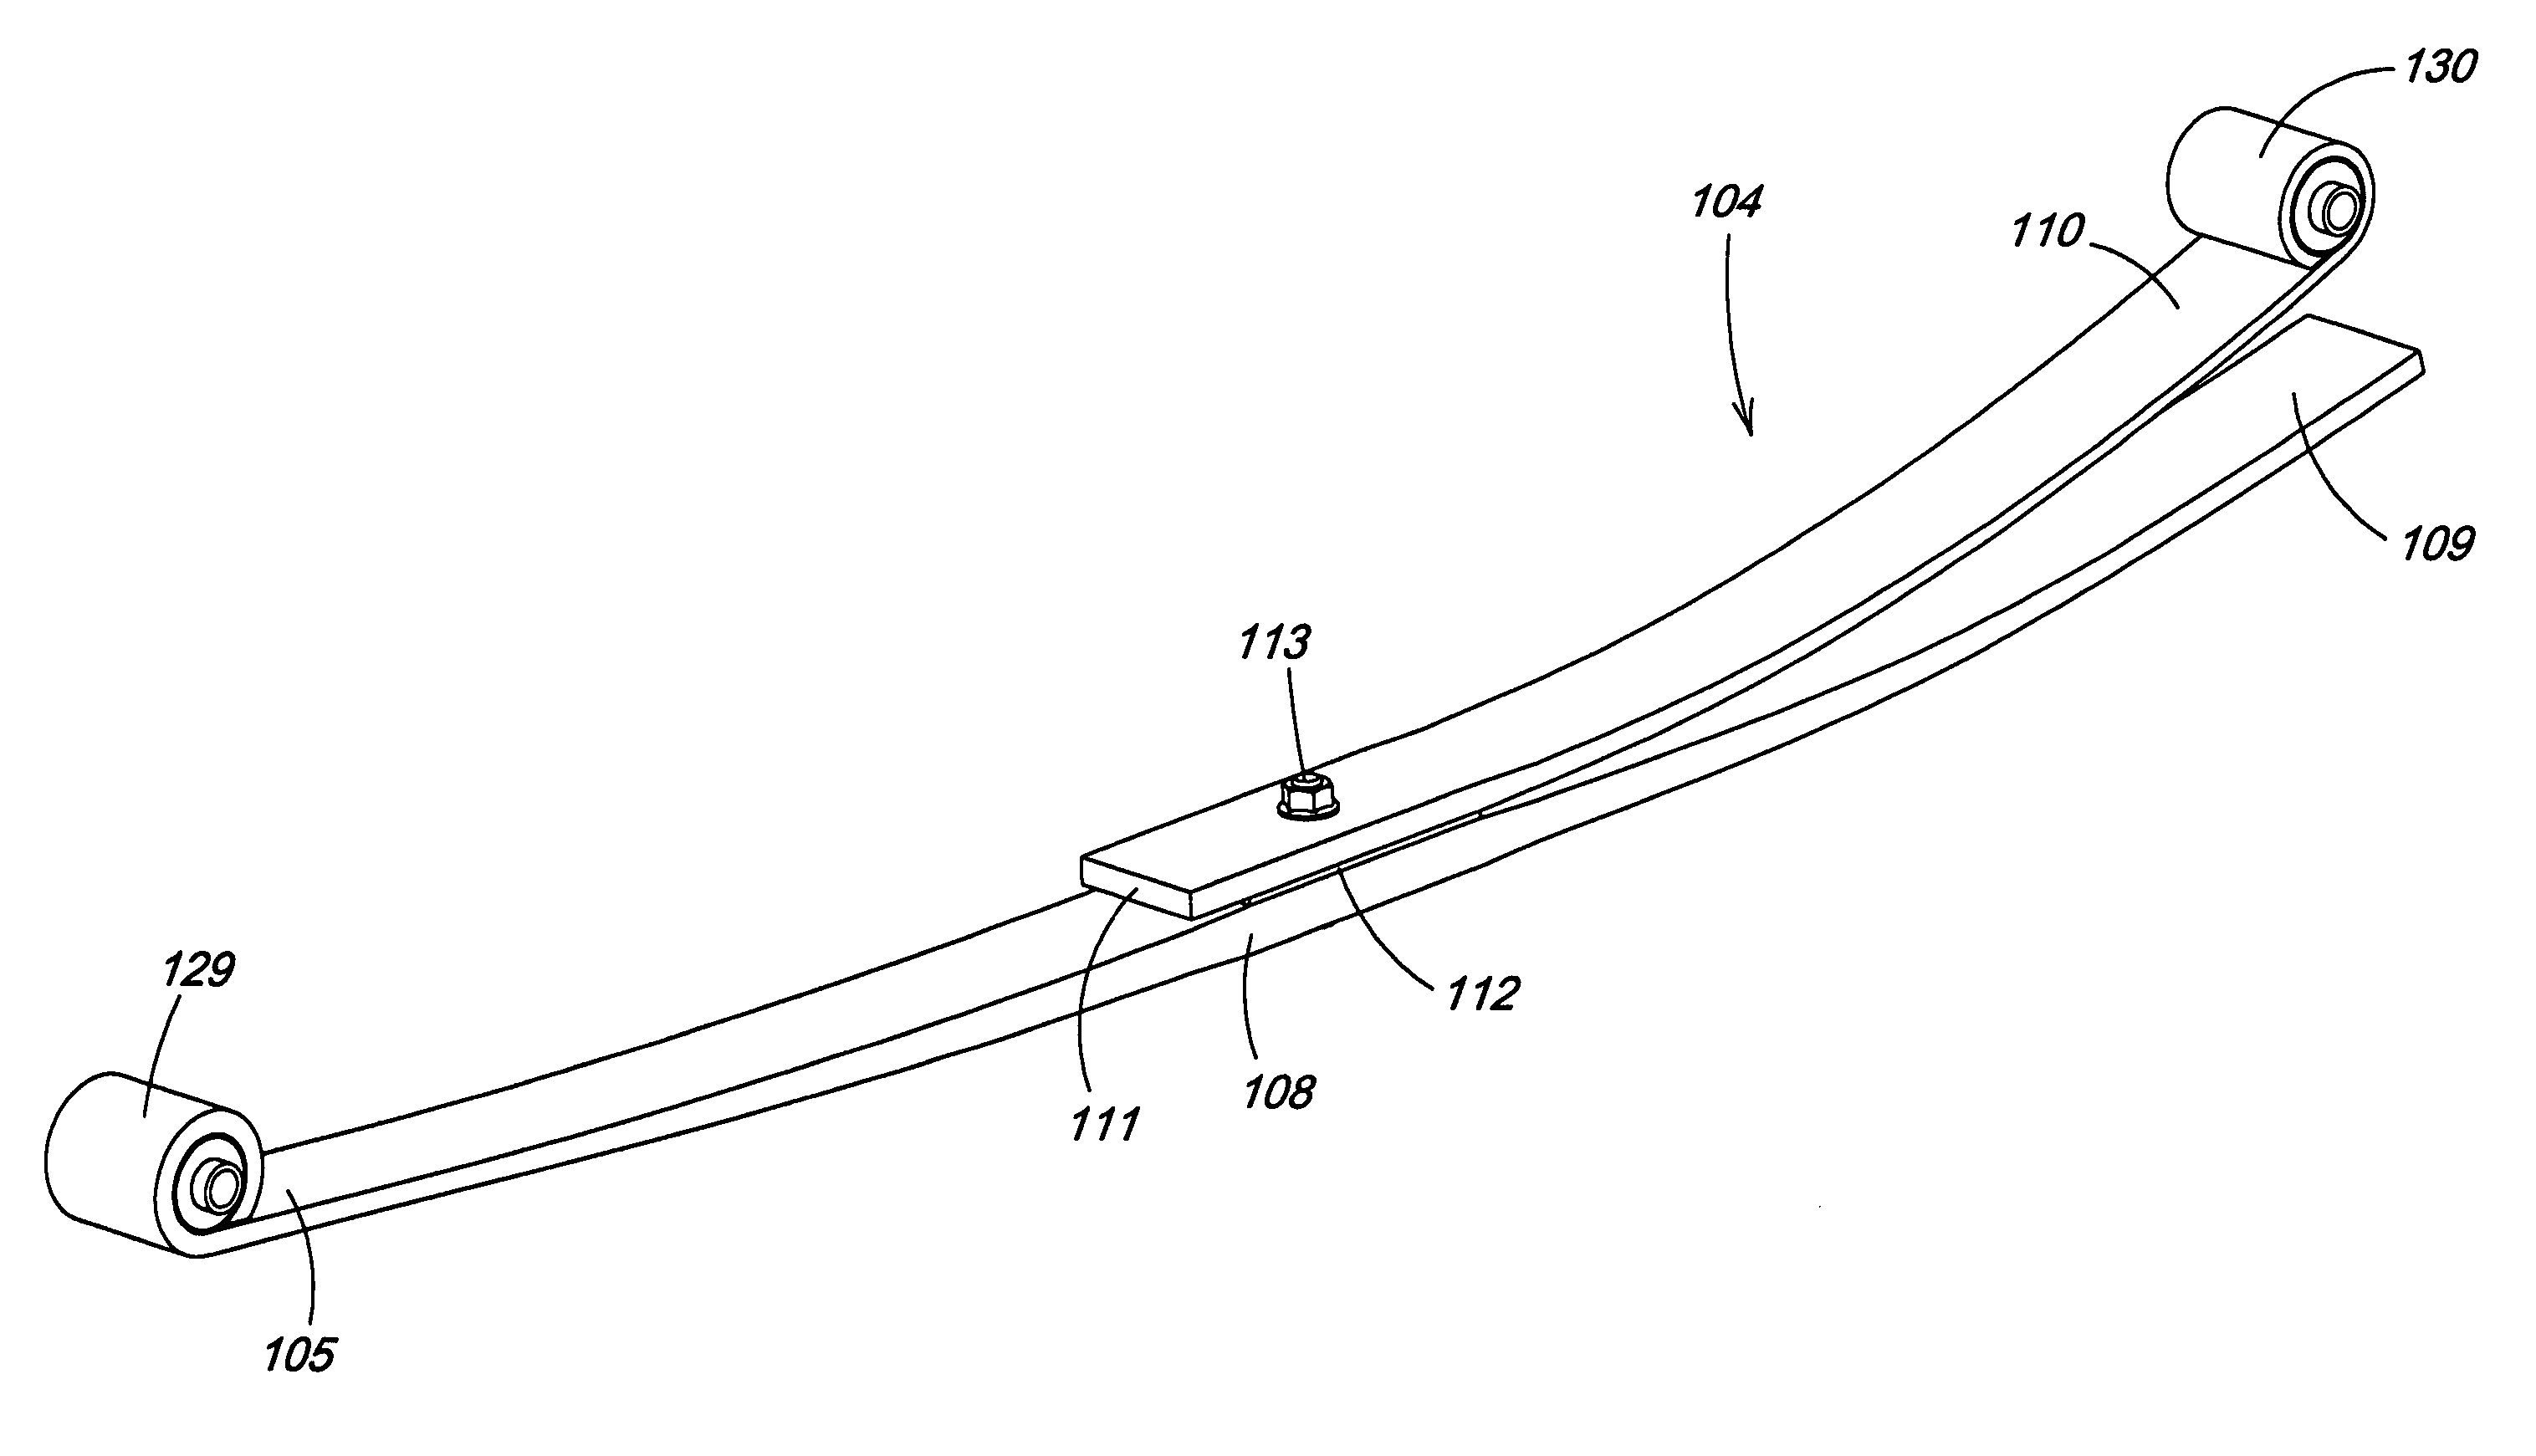 Dual rate leaf spring suspension for utility vehicle